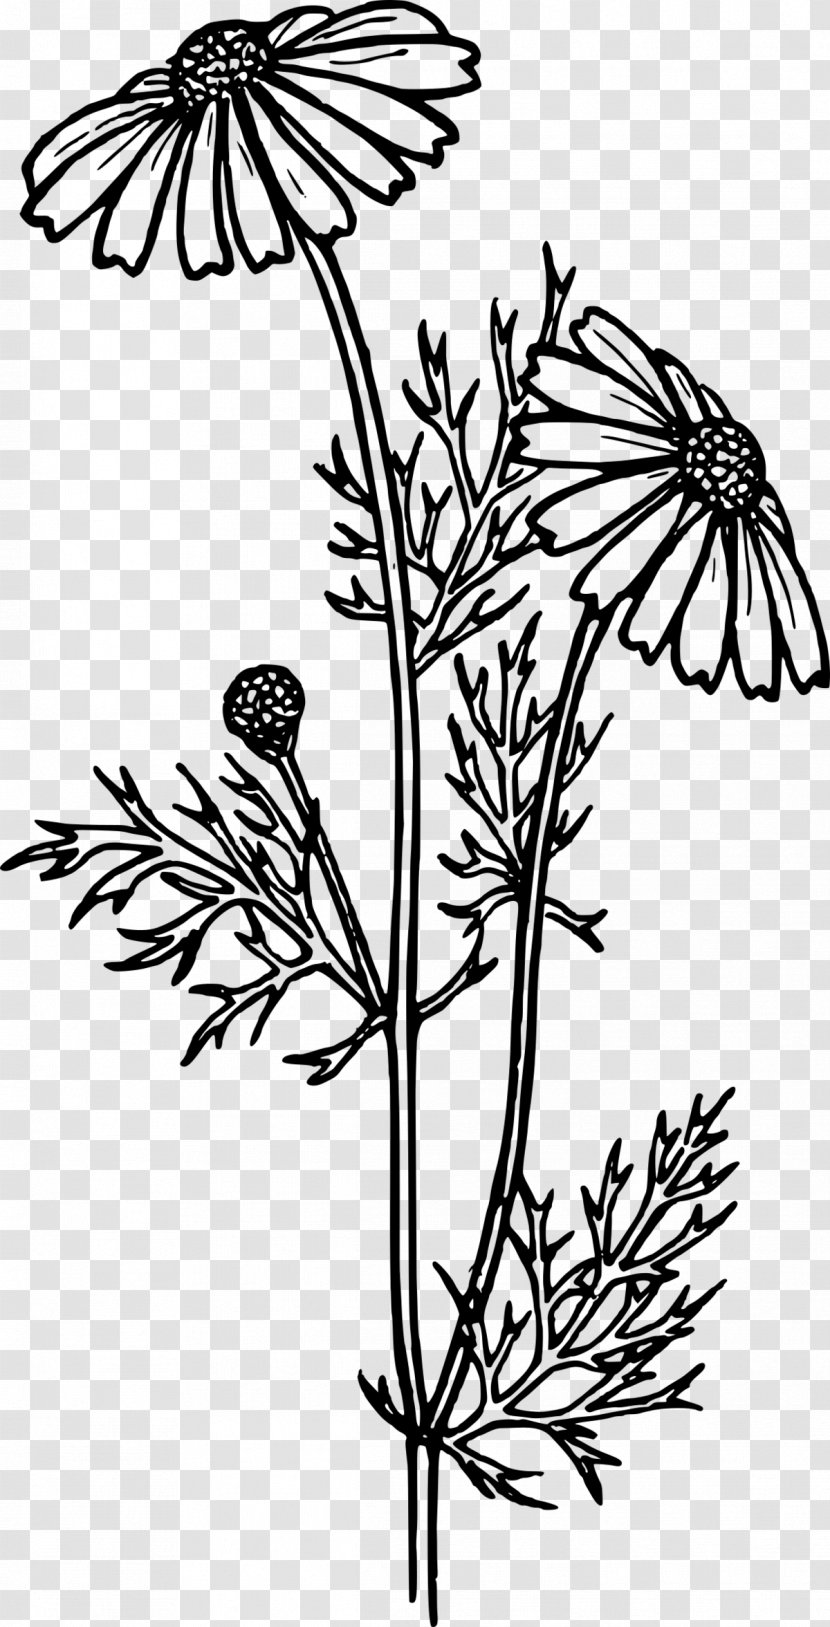 Clip Art Vector Graphics Feverfew Drawing Branch Pincushion Flower Scabiosa Columbaria Transparent Png